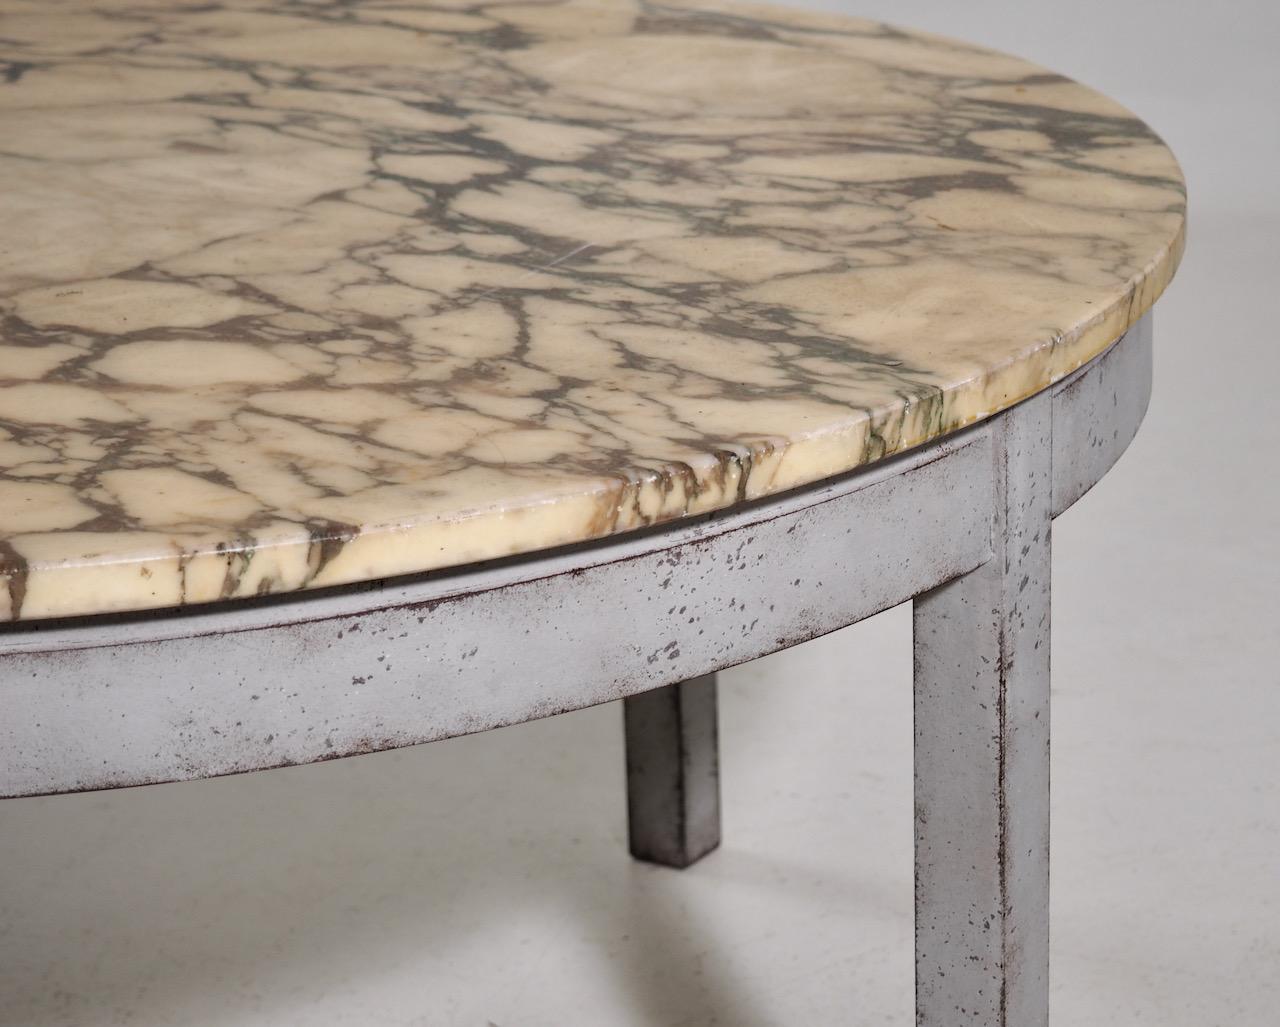 Gustavian style sofa table with marble top, small damage on marble top, 20th century.